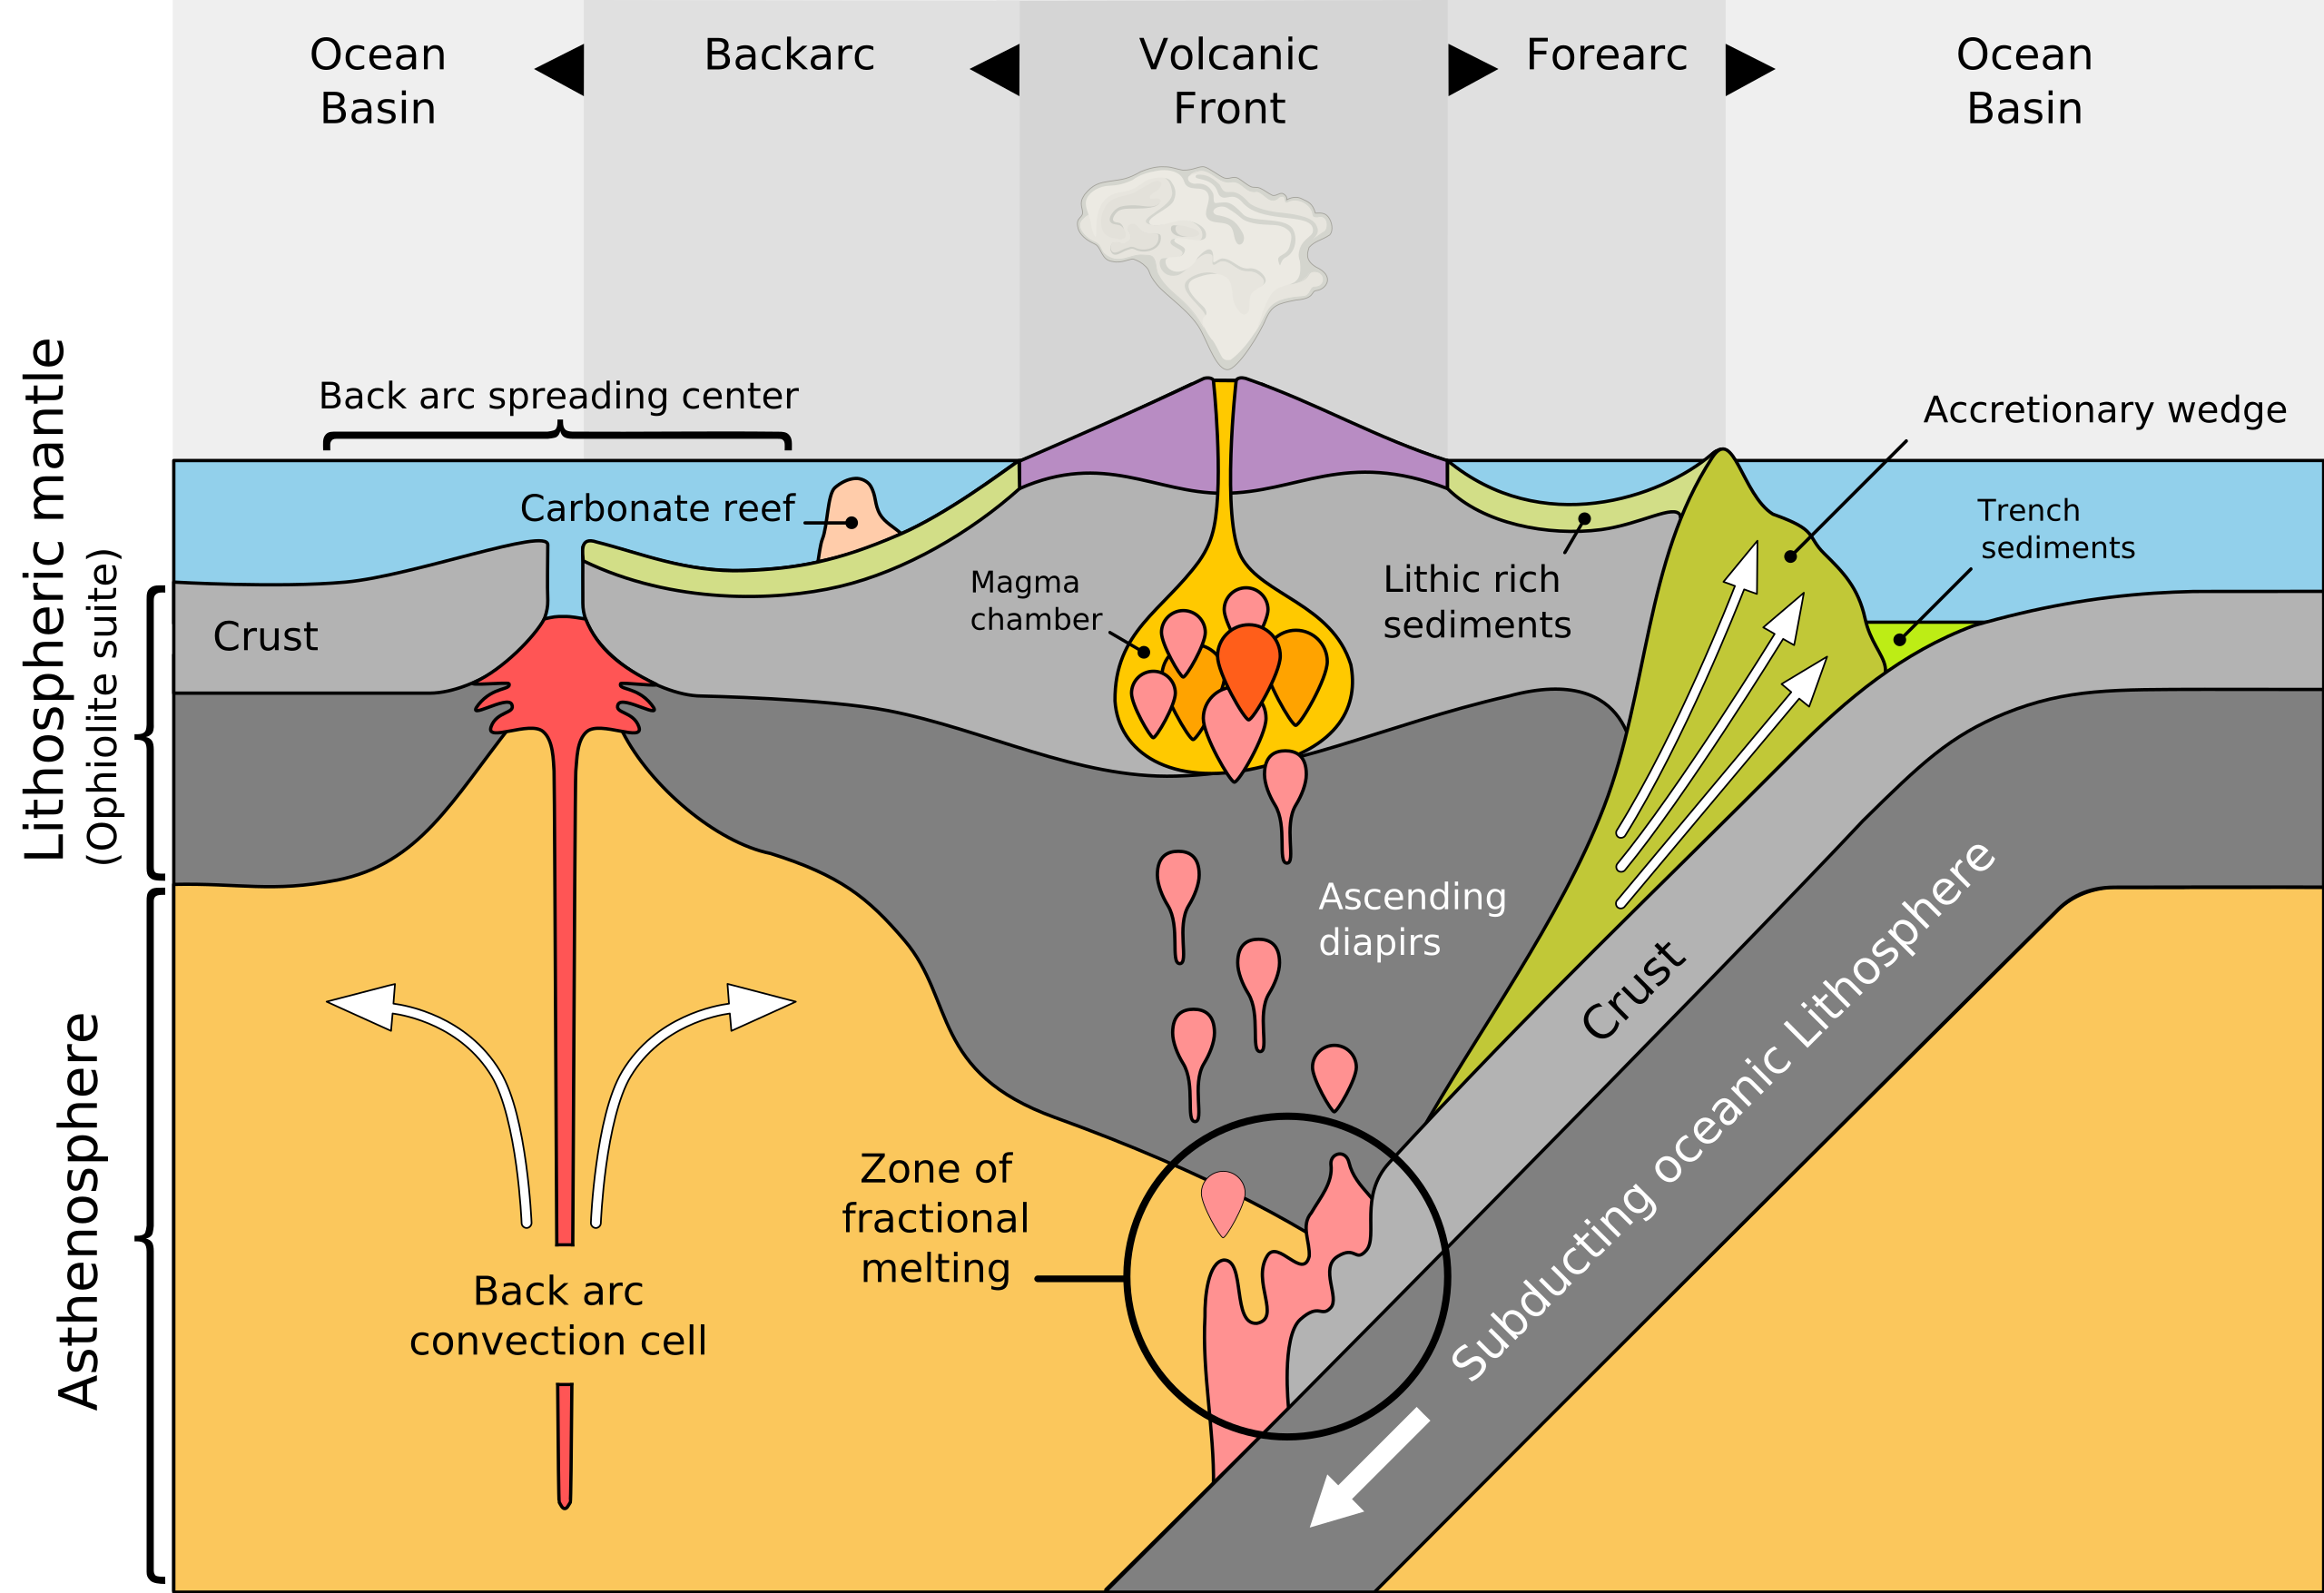 Subducting oceanic lithosphere moved under a magma chamber